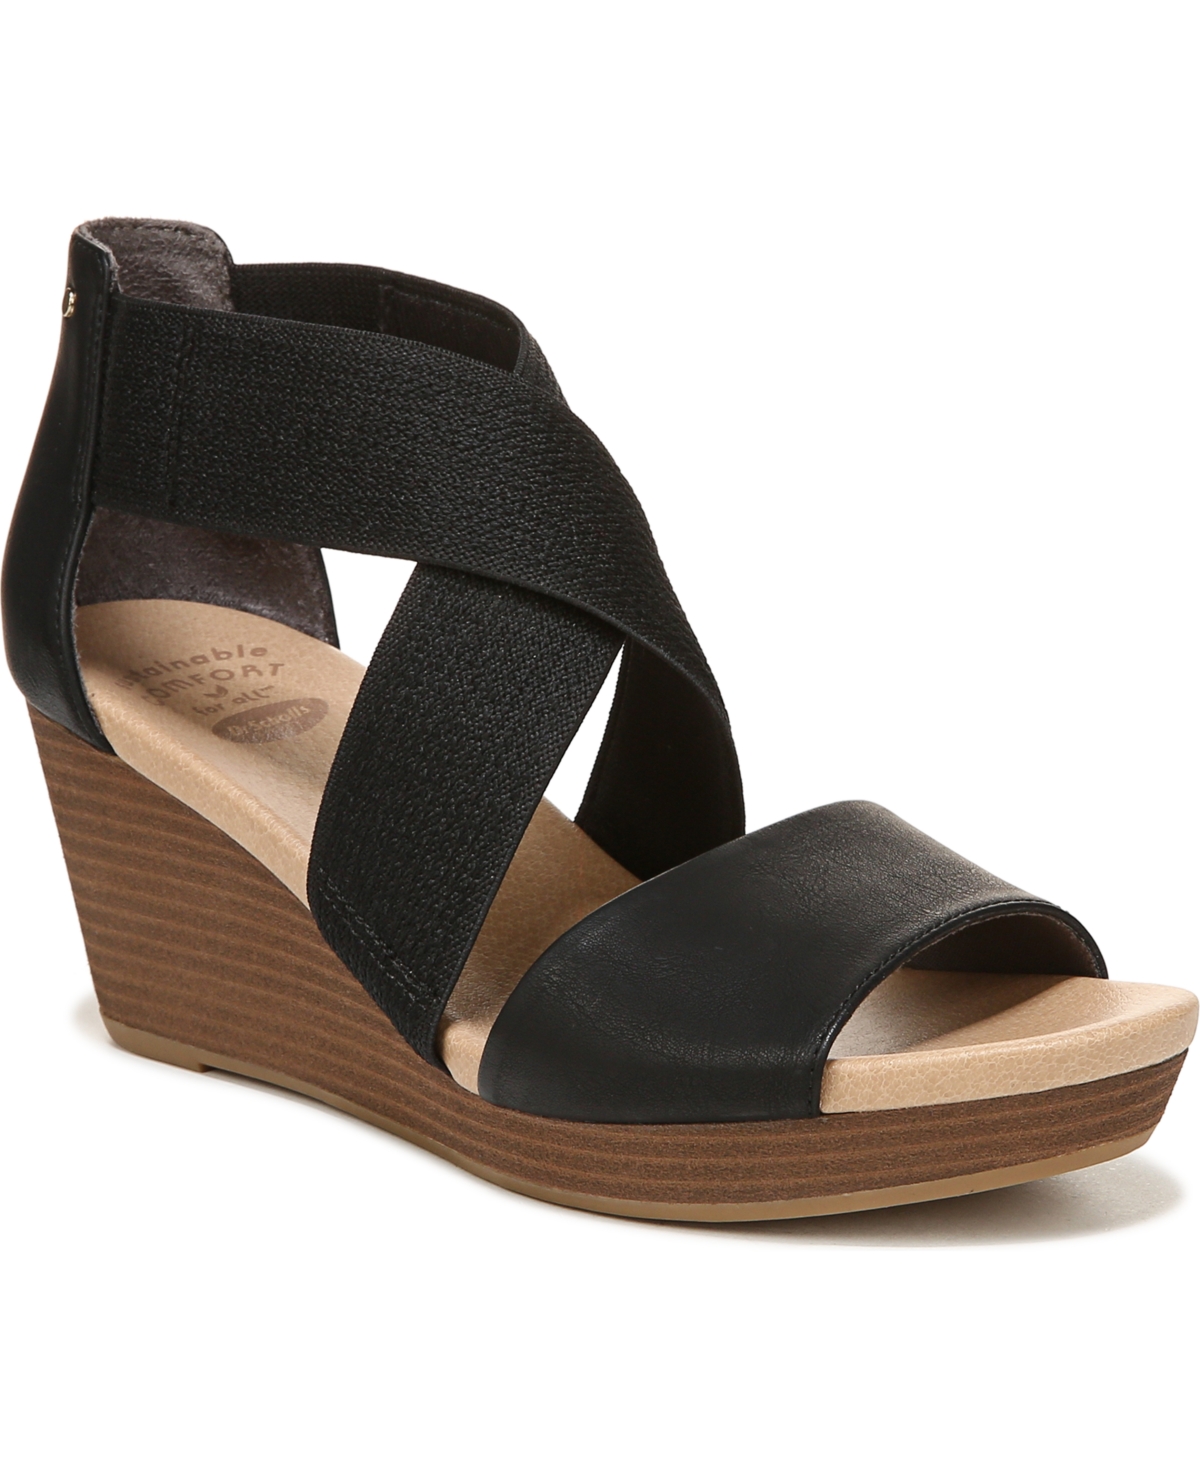 Women's Barton-Band Wedge Sandals - Black Faux Leather